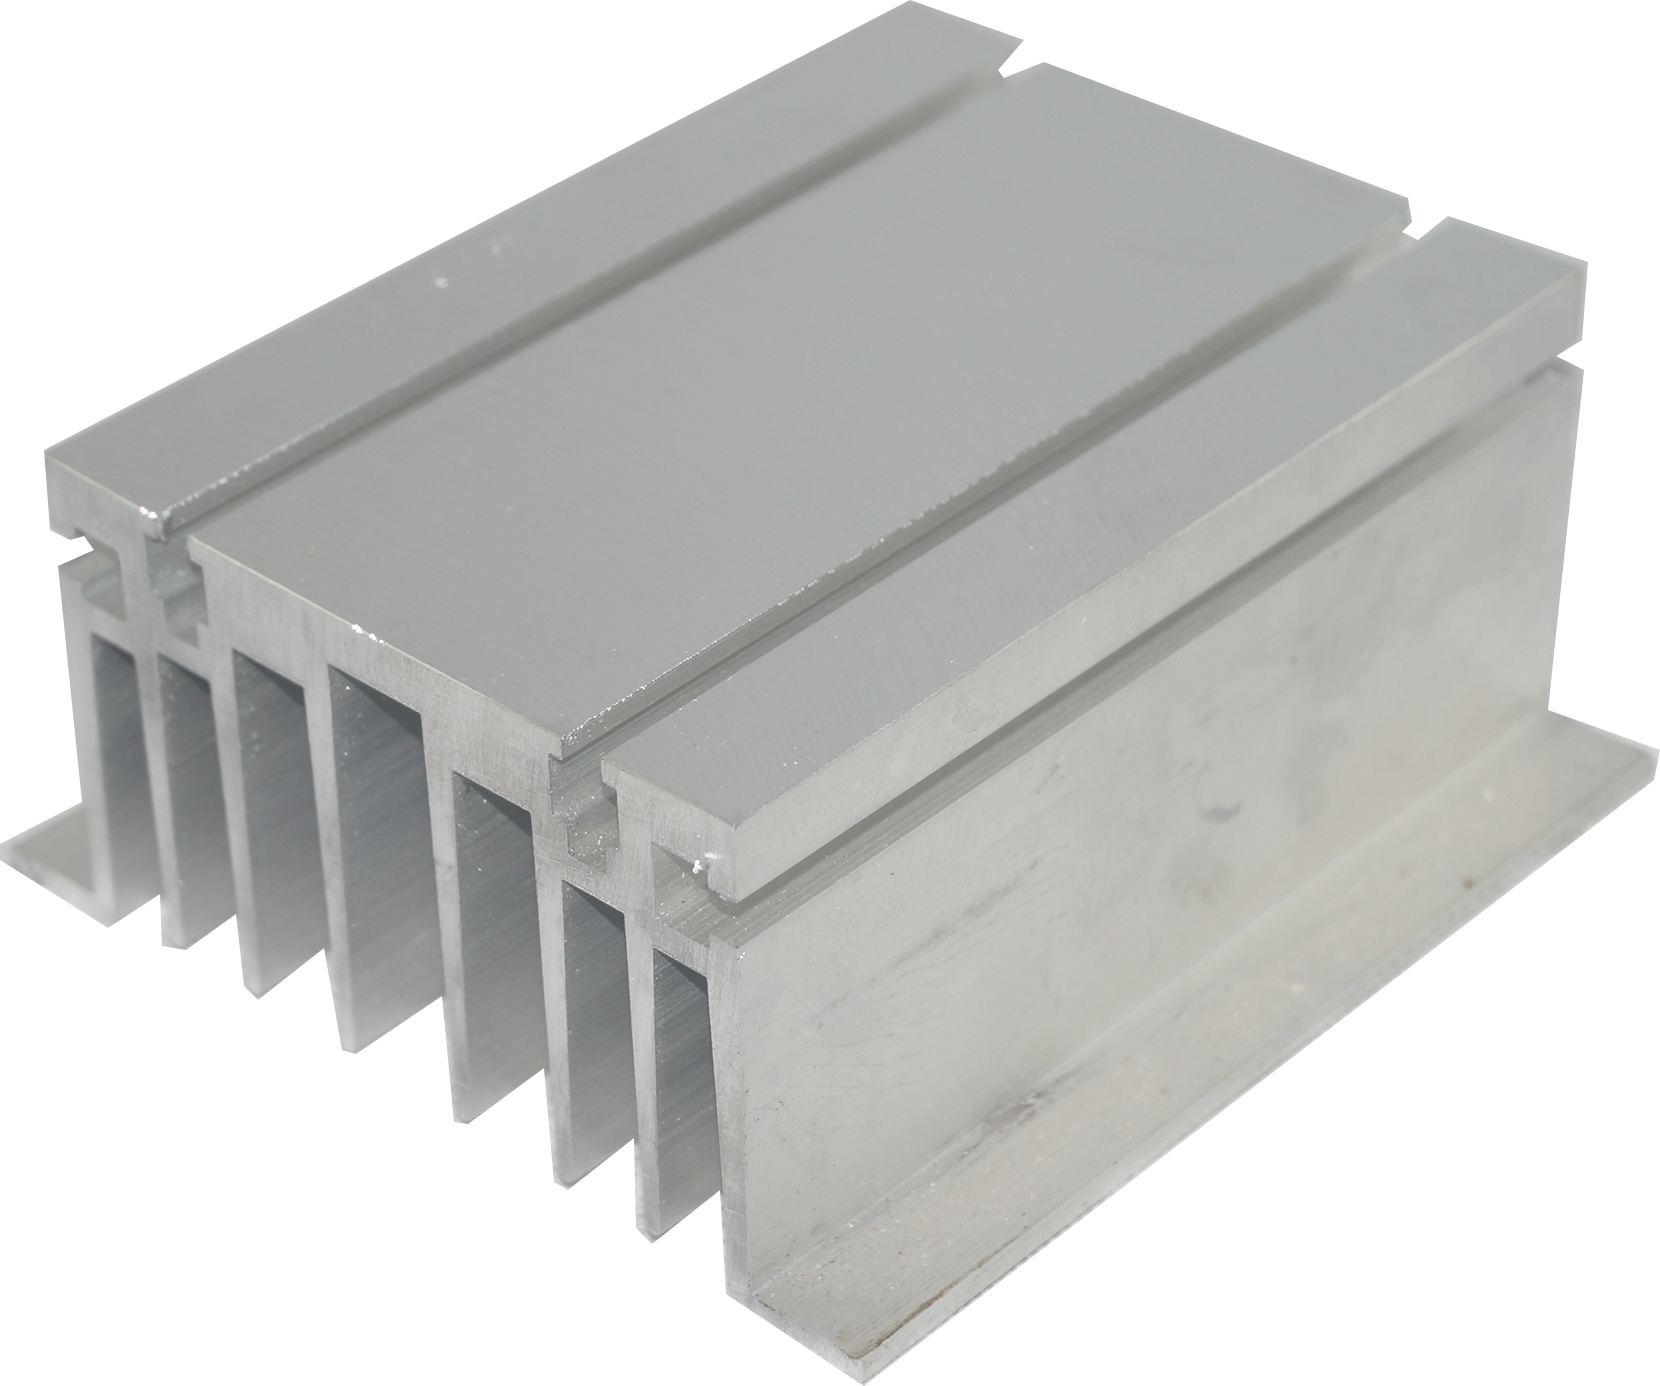 H71/110M, Heatsink for Single or Three Phase Solid State Relay, 3 x 13Amp or 1 x 35 Amp @ 50 Deg C